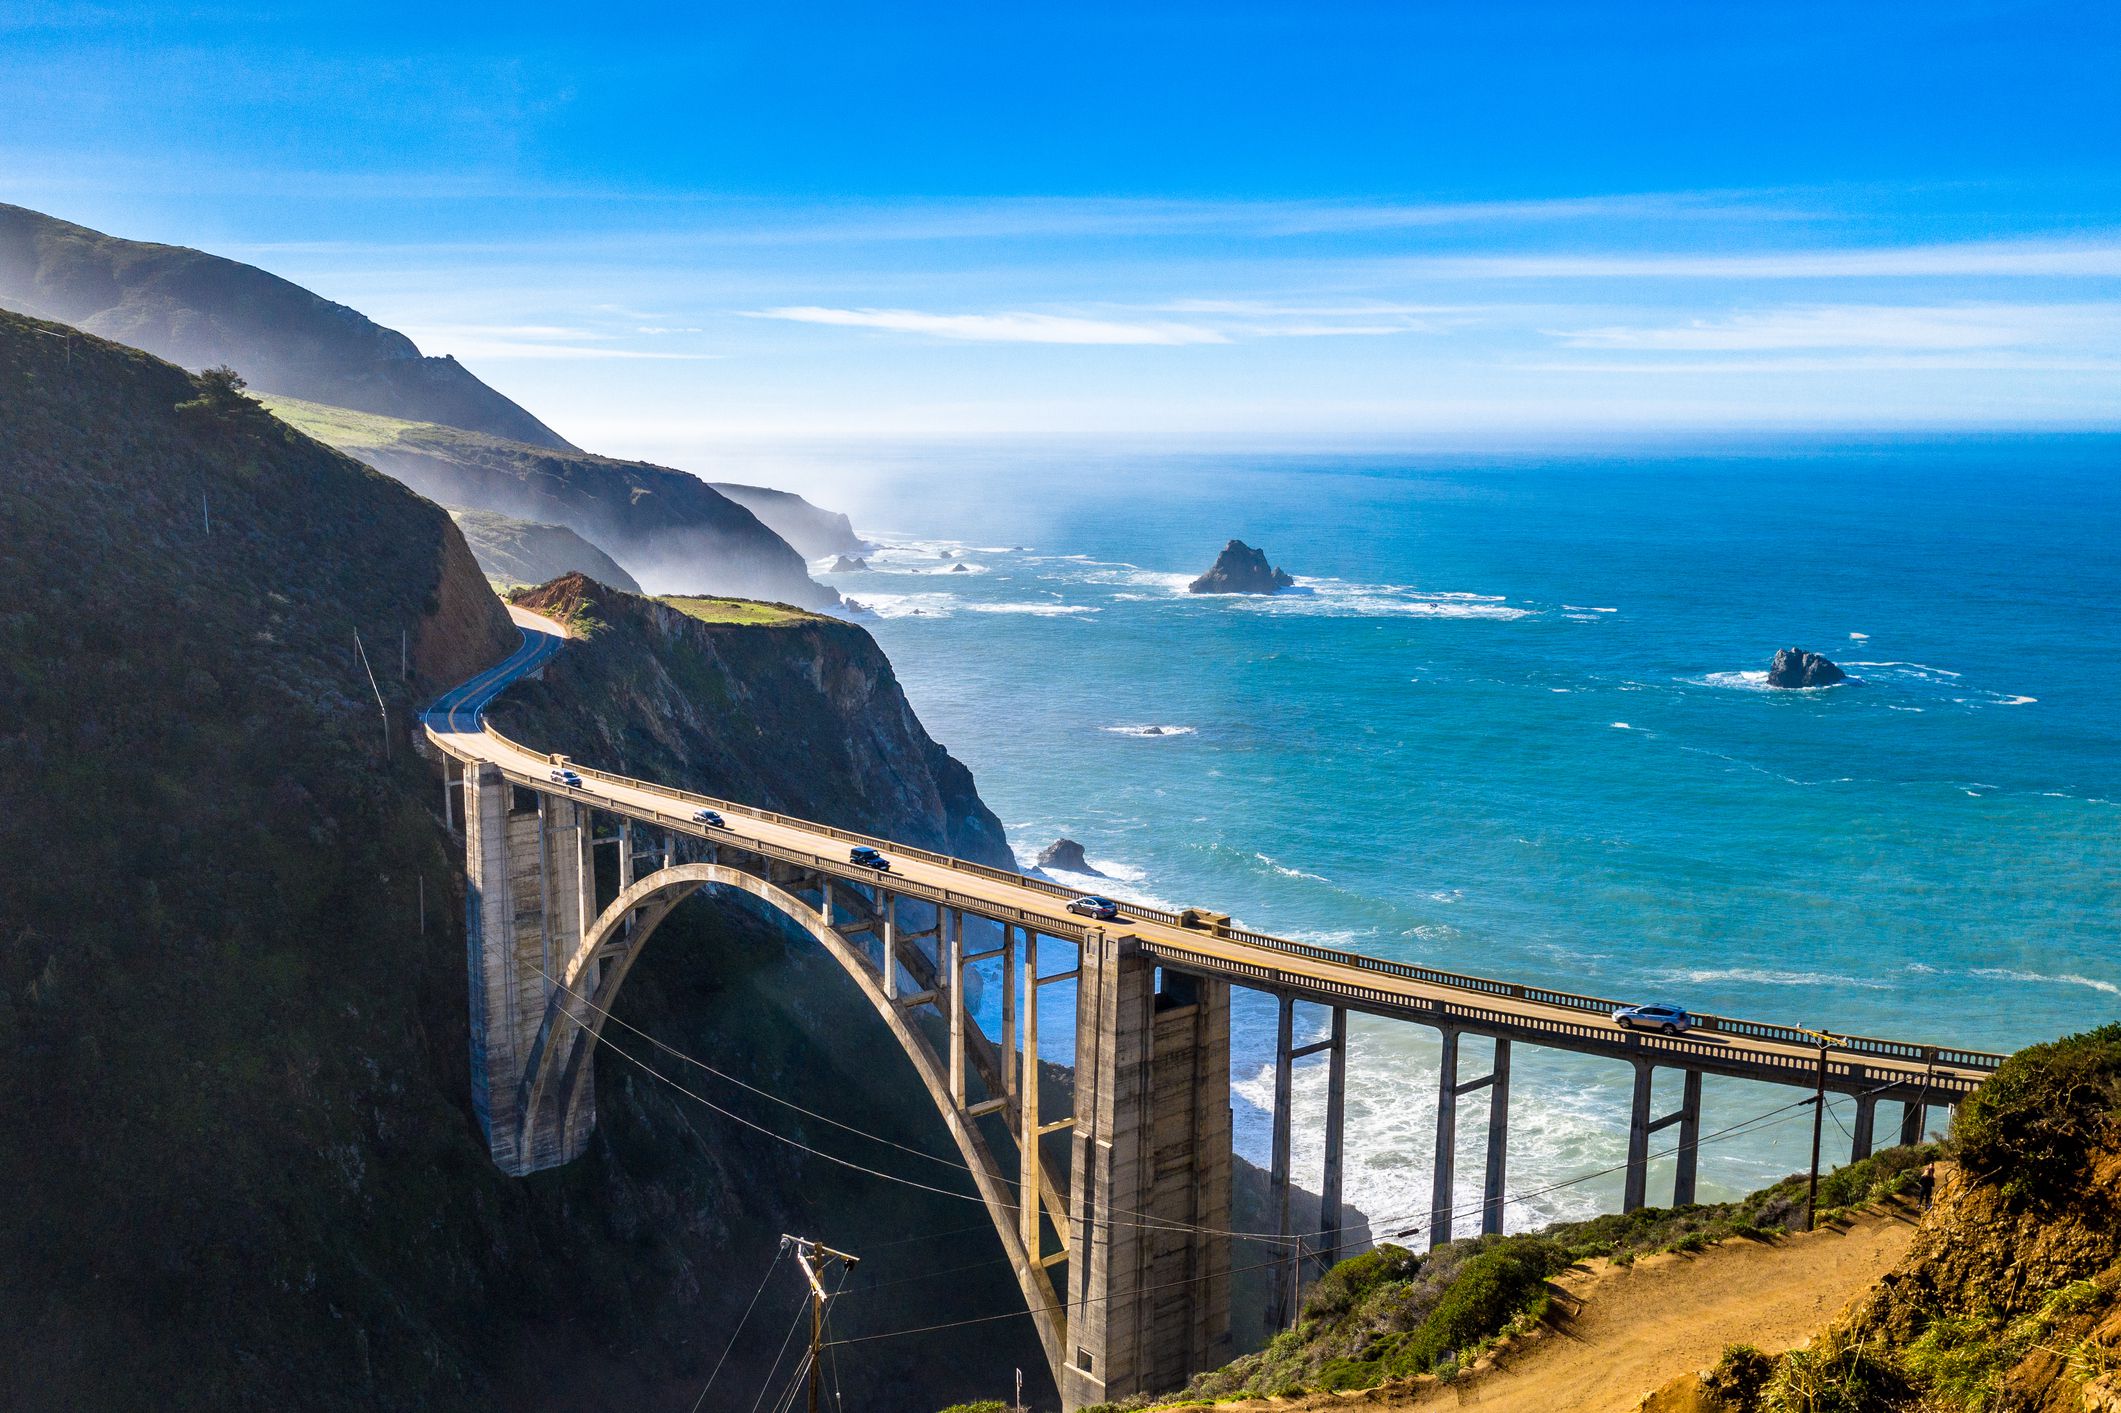 <p><b>California, Oregon, and Washington</b>Jaw-dropping views of the Pacific, sandy beaches, redwood forests, and interesting towns make this a route to tackle not in days, but weeks — especially when you combine the <a href="https://www.visittheusa.com/trip/pacific-coast-highway-road-trip">Pacific Coast Highway</a> with the Pacific Coast Scenic Byway in Oregon and Washington. Mealer recommends the stretch from San Francisco north through those two states. "You must take time to see the lighthouses and some of the little towns along with the historic spots," she raves. "It took me over two weeks to make that ride." Though not as technical as some of the other roads on our list, the road can be twisty as it hugs the coast, and the steep drop off to the water can churn the stomach of even experienced riders.</p>  <p><b>Can't-miss stop:</b> How to pick just one? History buffs will want to carve out an afternoon to explore <a href="https://hearstcastle.org/">Hearst Castle</a>, William Randolph Hearst's epic estate, near San Simeon, California. Further north, in Big Sur, the Bixby Bridge is the star of one of the most-photographed vistas on the coast. </p>